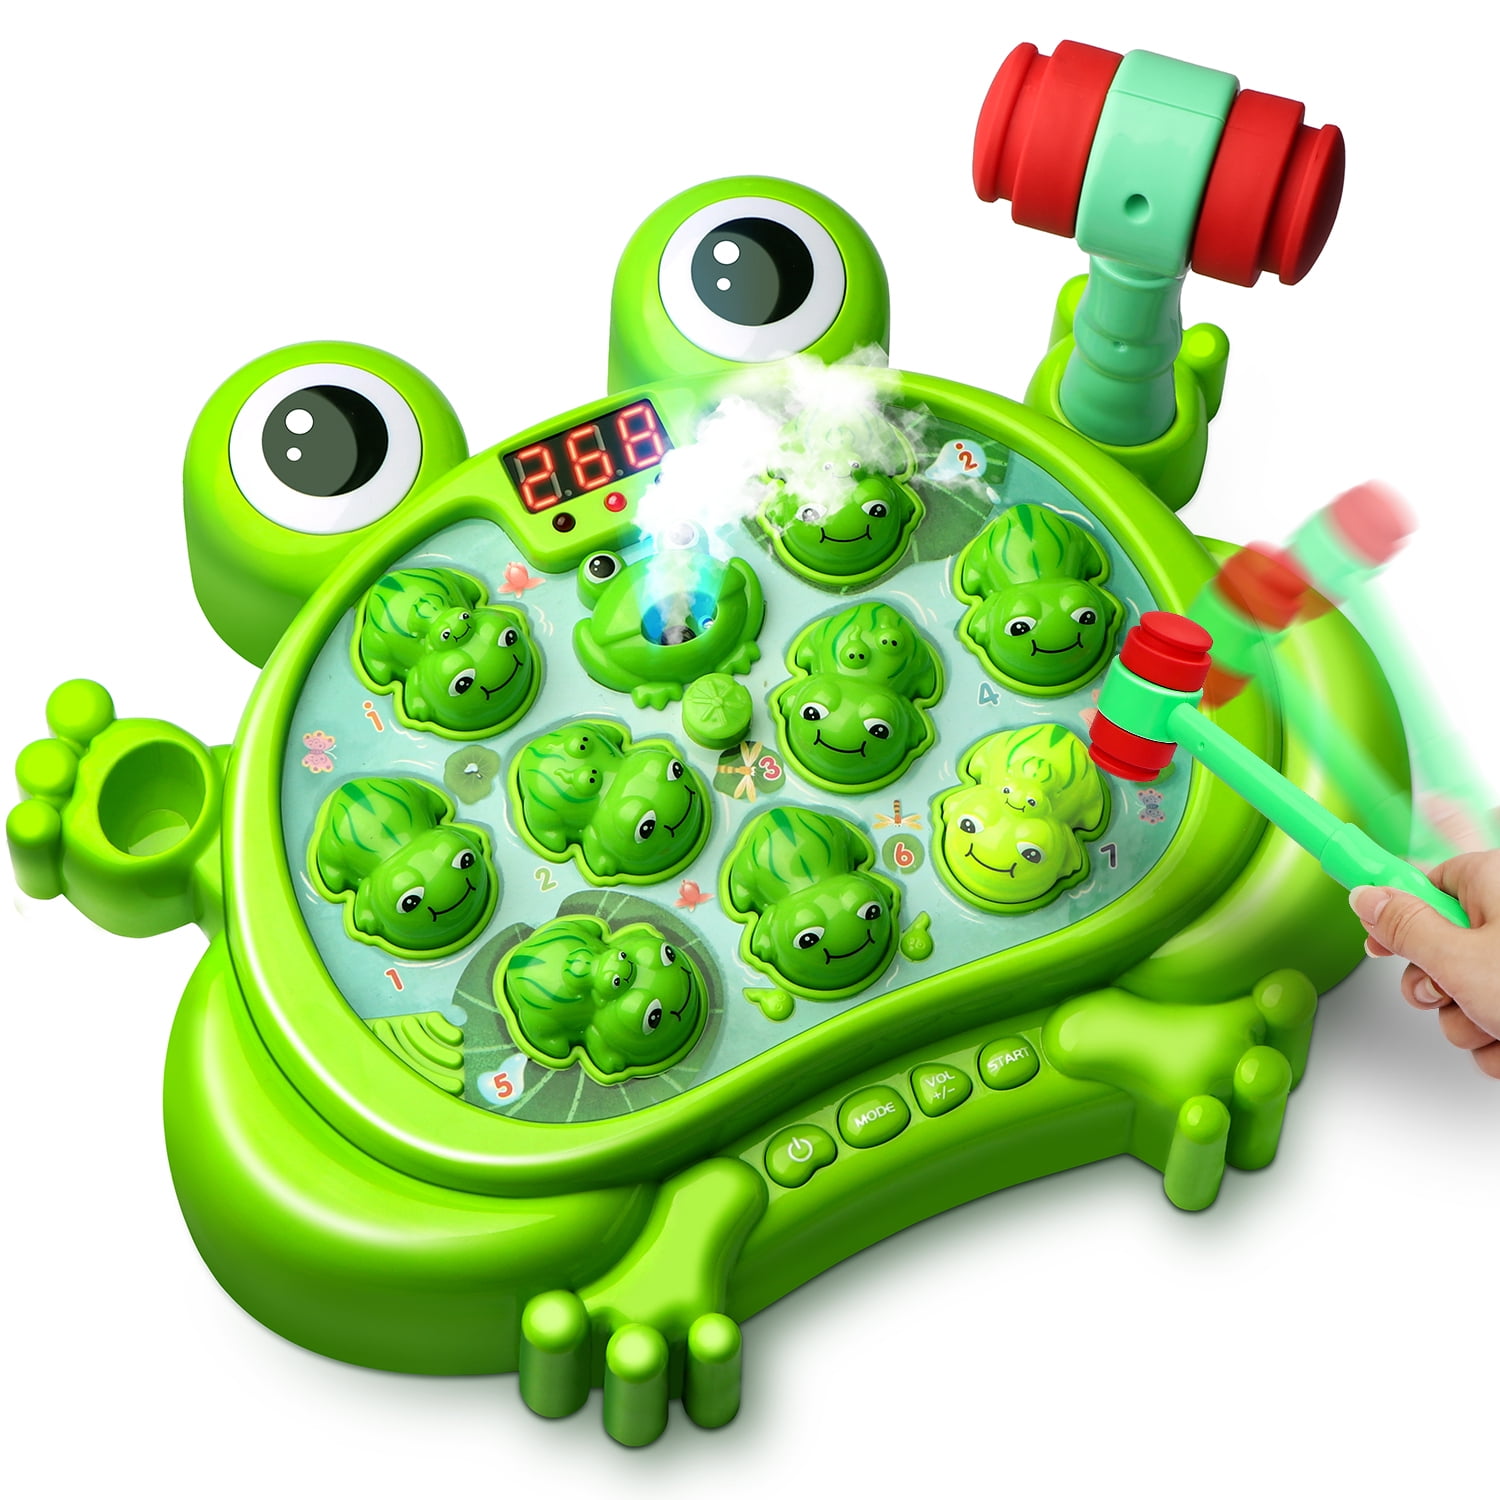 YE Interactive Whack A Frog Game, Learning, Active, Early Developmental  Toy, Fun Gift For Age 3, 4, 5, 6, 7, 8 Years Old Kids, Boys, Girls,2